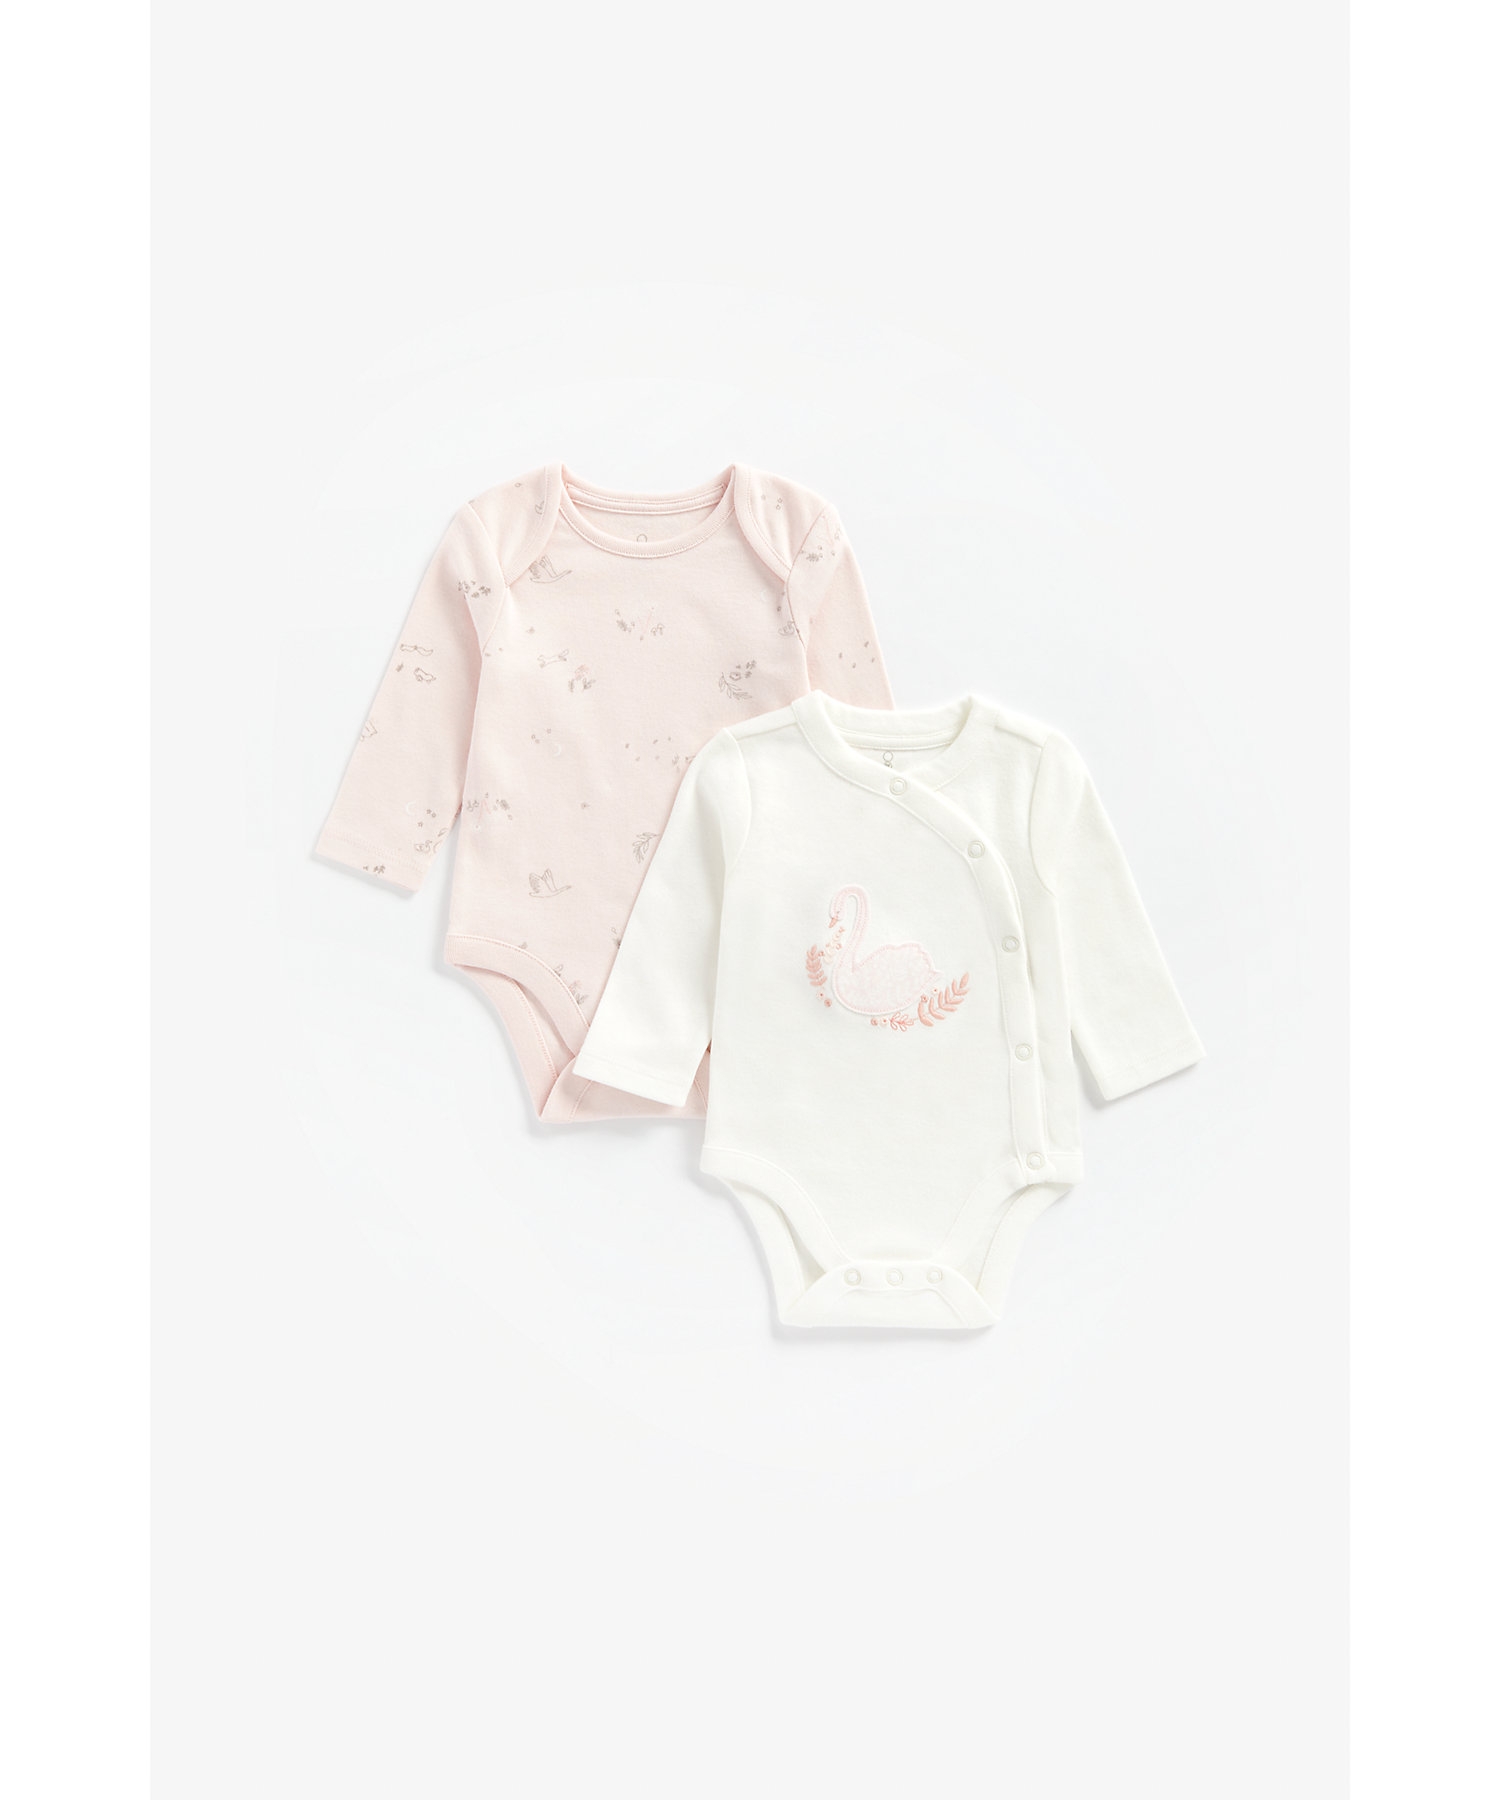 Mothercare | Girls Full Sleeves Bodysuit Swan Patchwork And Embroidery - Pack Of 2 - Pink 0